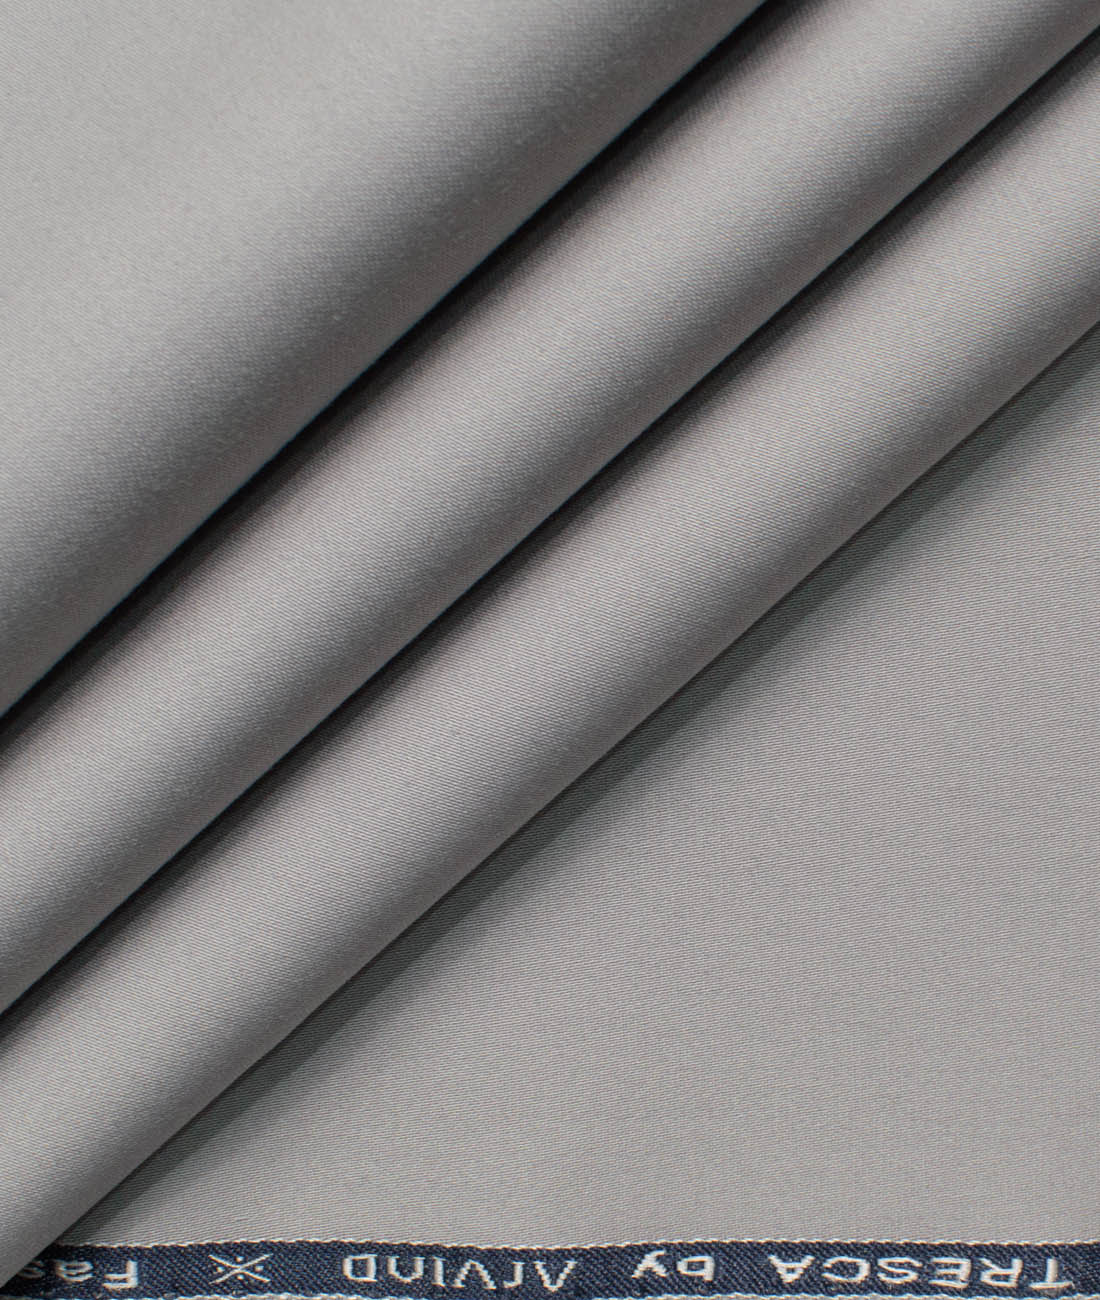 Trouser Fabric Made of Cotton, Stretch in Plain Black 150 Cm Wide Plain  Plain Fabric - Etsy